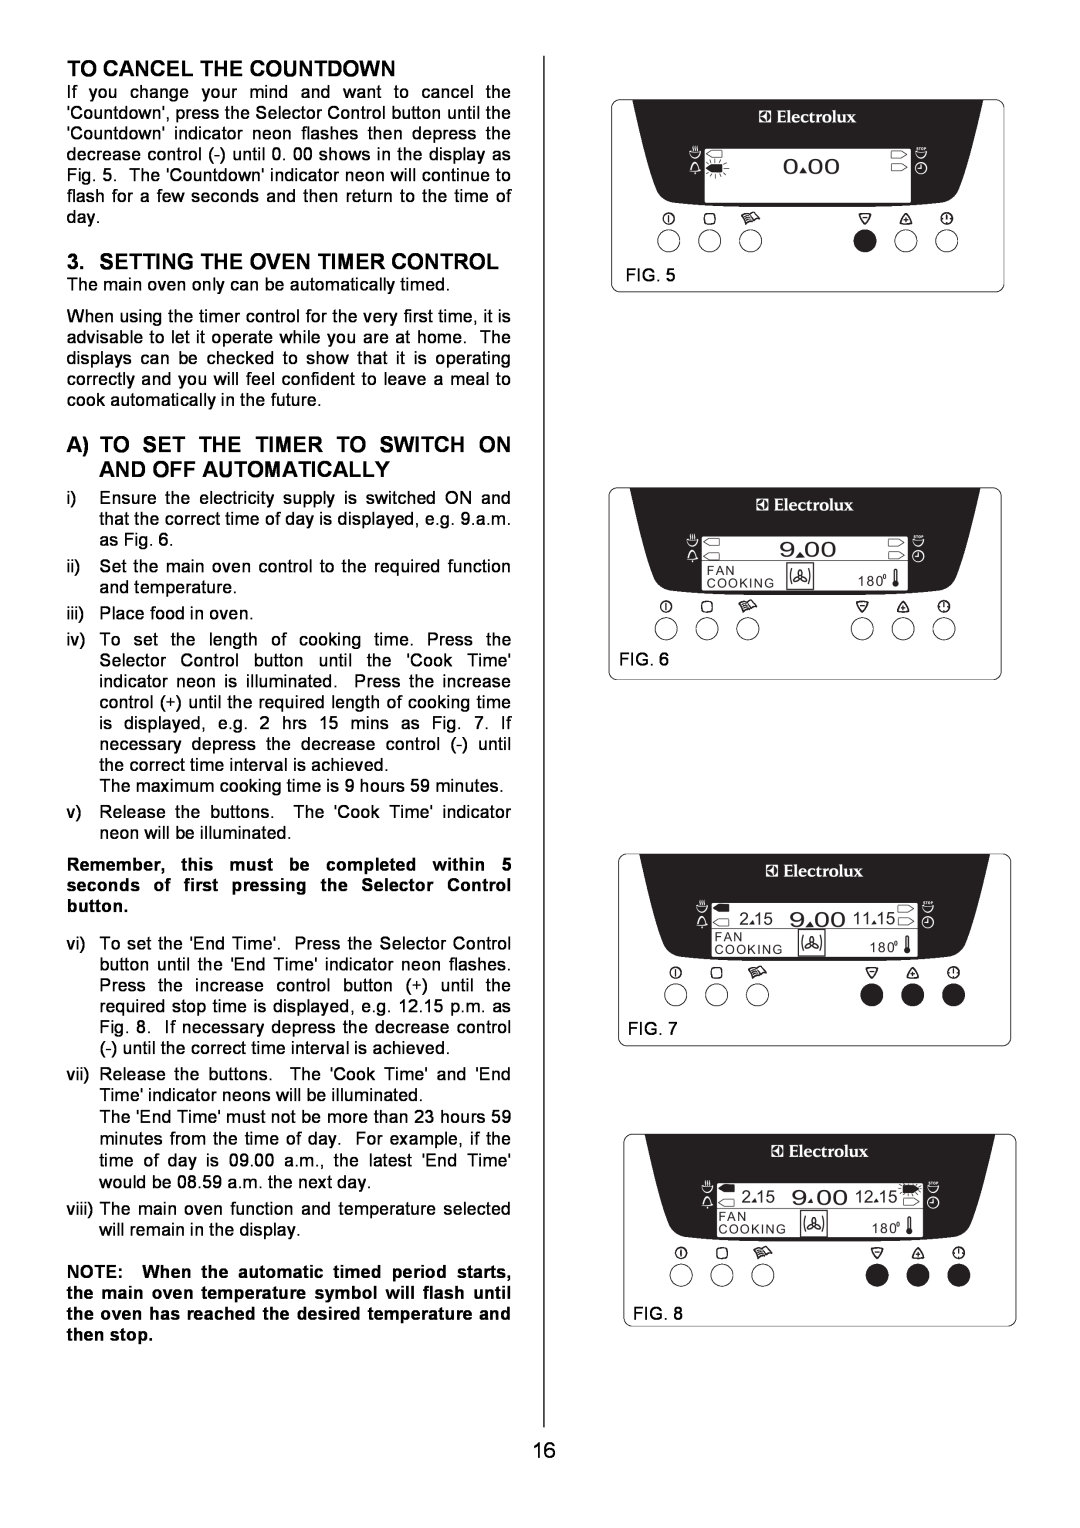 Electrolux EOD6390 manual To Cancel The Countdown, Setting The Oven Timer Control, 9 00 11, 9 00 12 